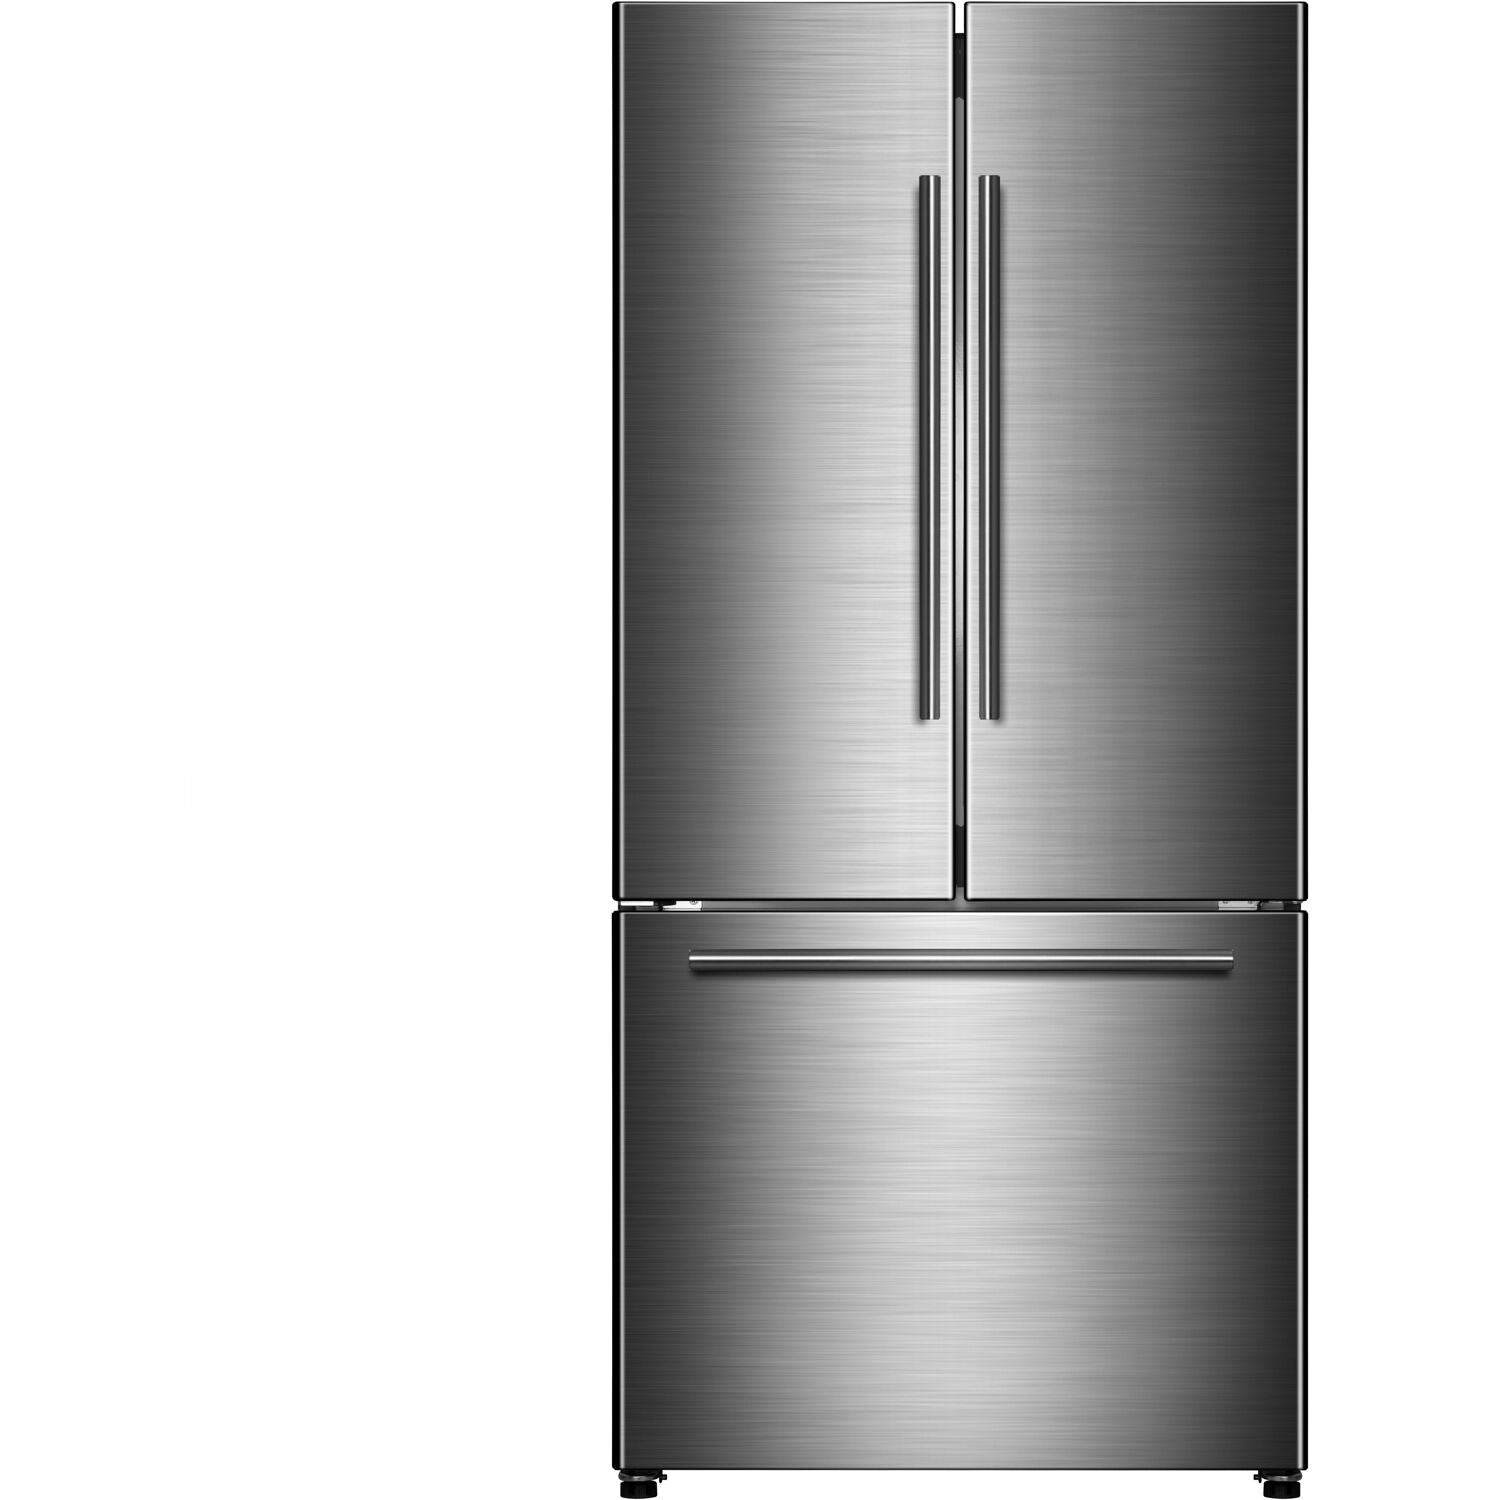 GALANZ - 33 in. W 18 cu. ft. French Door Refrigerator in